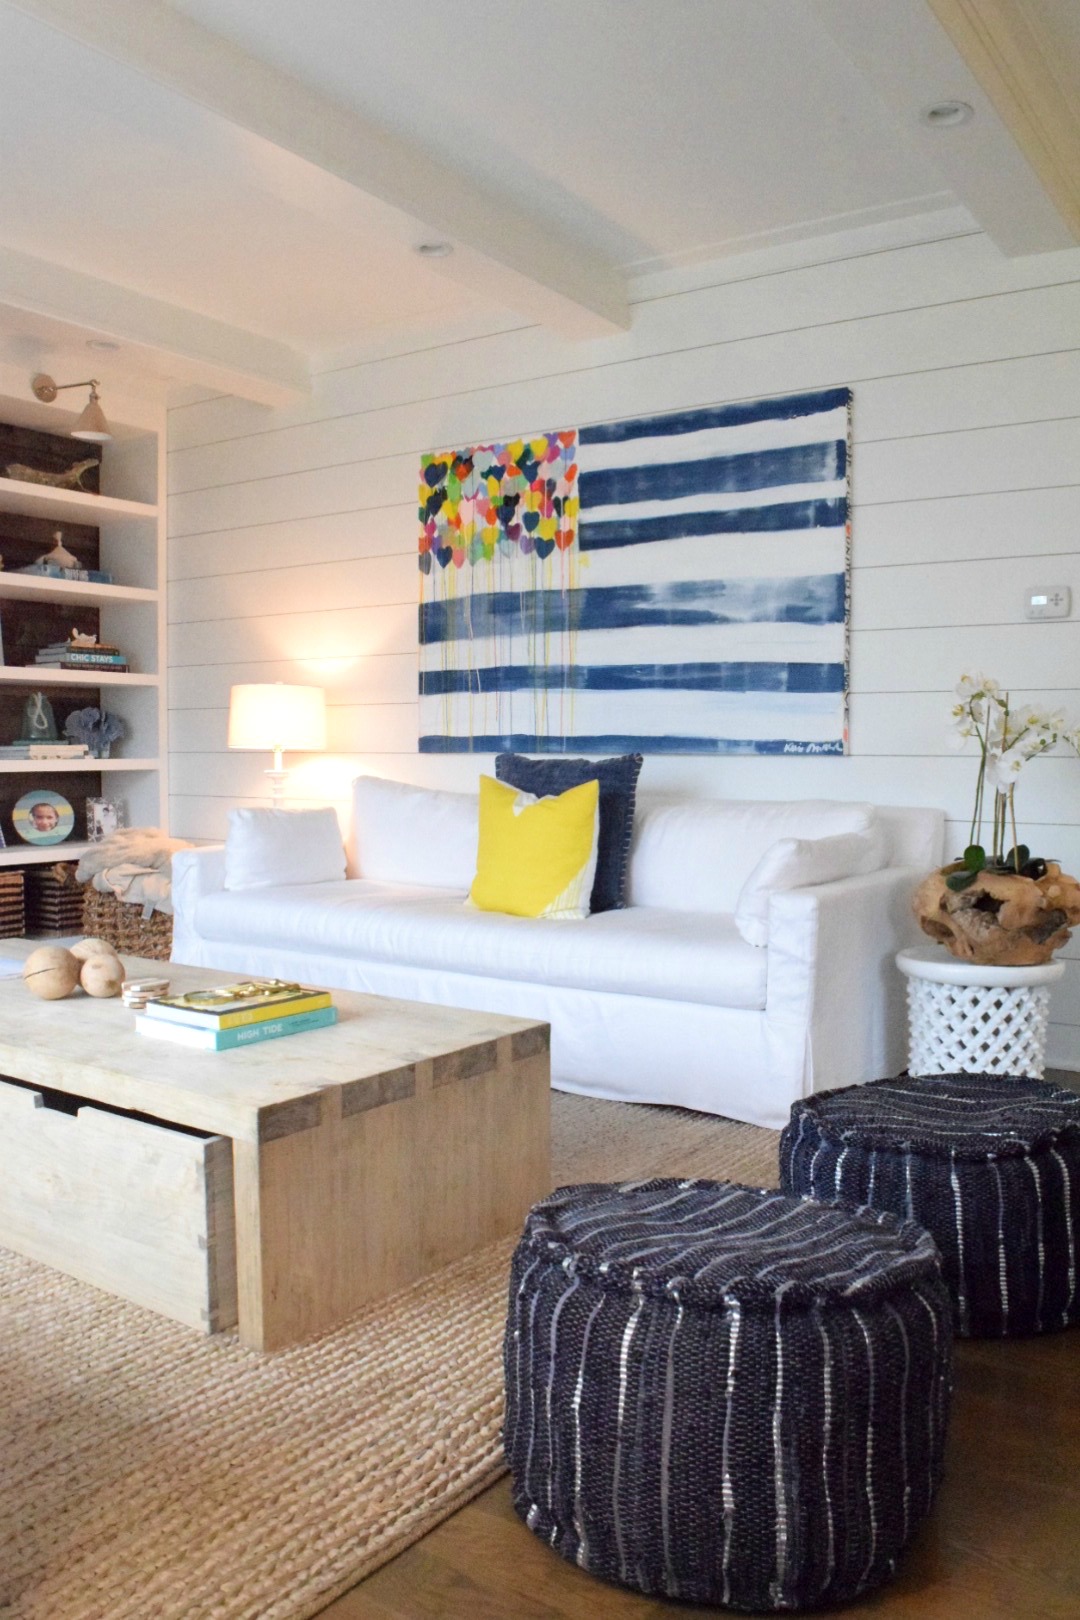 Costal Living- Come See Inside This Eclectic Beach Style Home